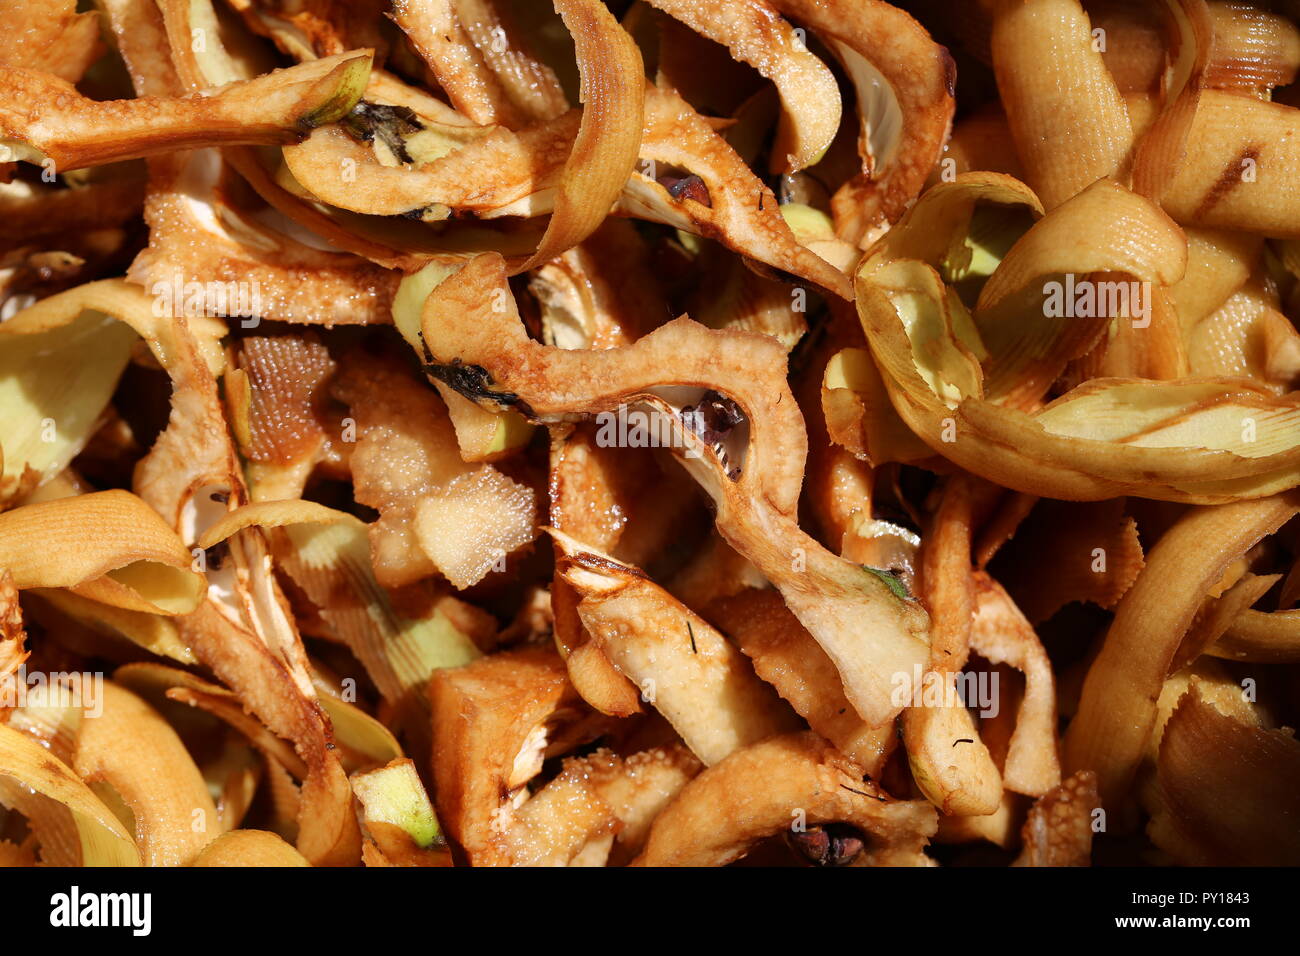 Peels of Quince. Remains of Quince. Pile of Quince's Kernels. Stock Photo